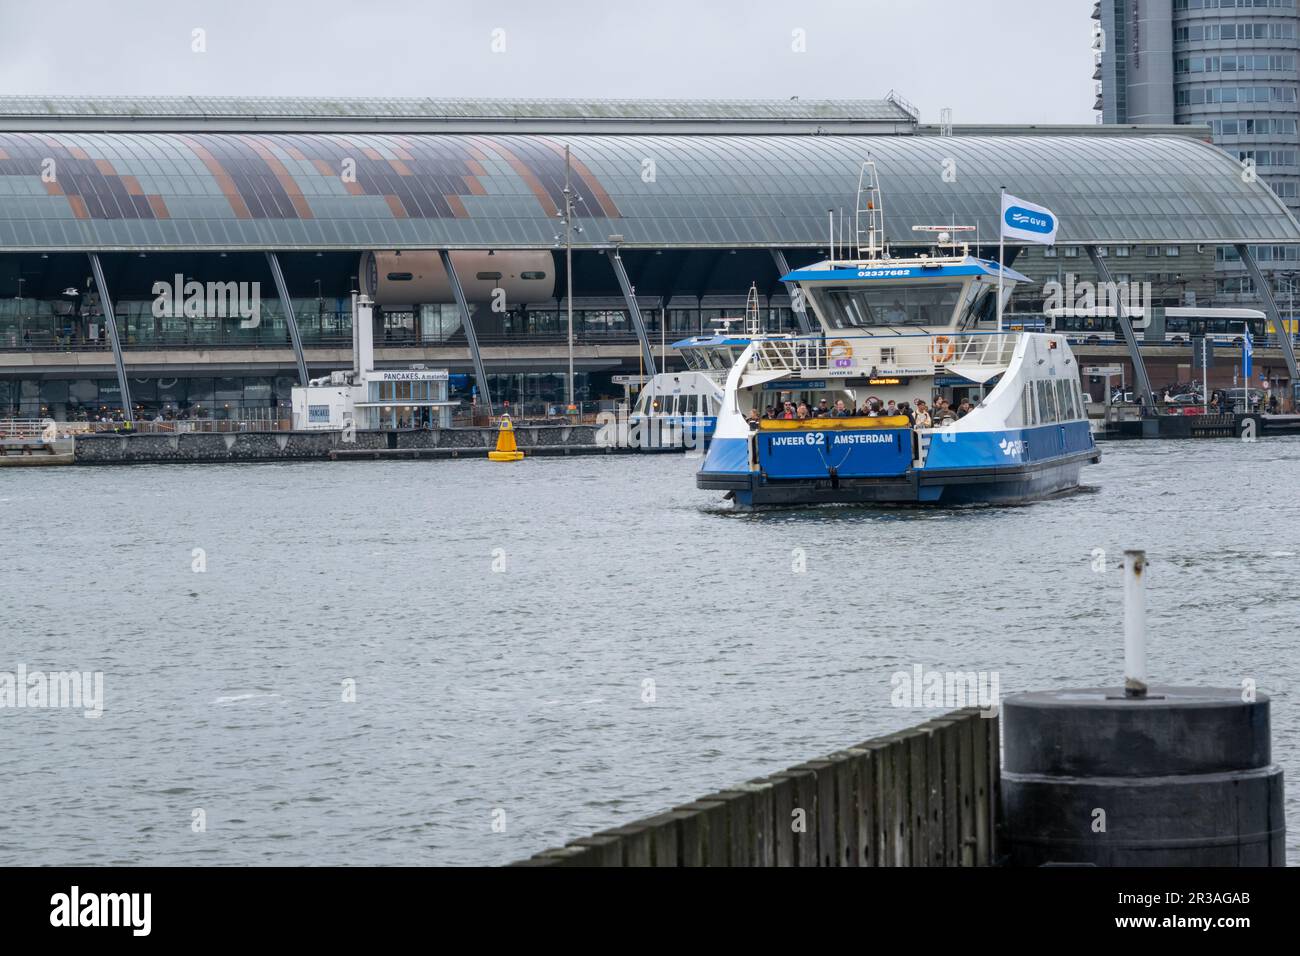 Amsterdam, The Netherlands - 8 September 2022: A GVB ferryboat crossing the IJ River Stock Photo